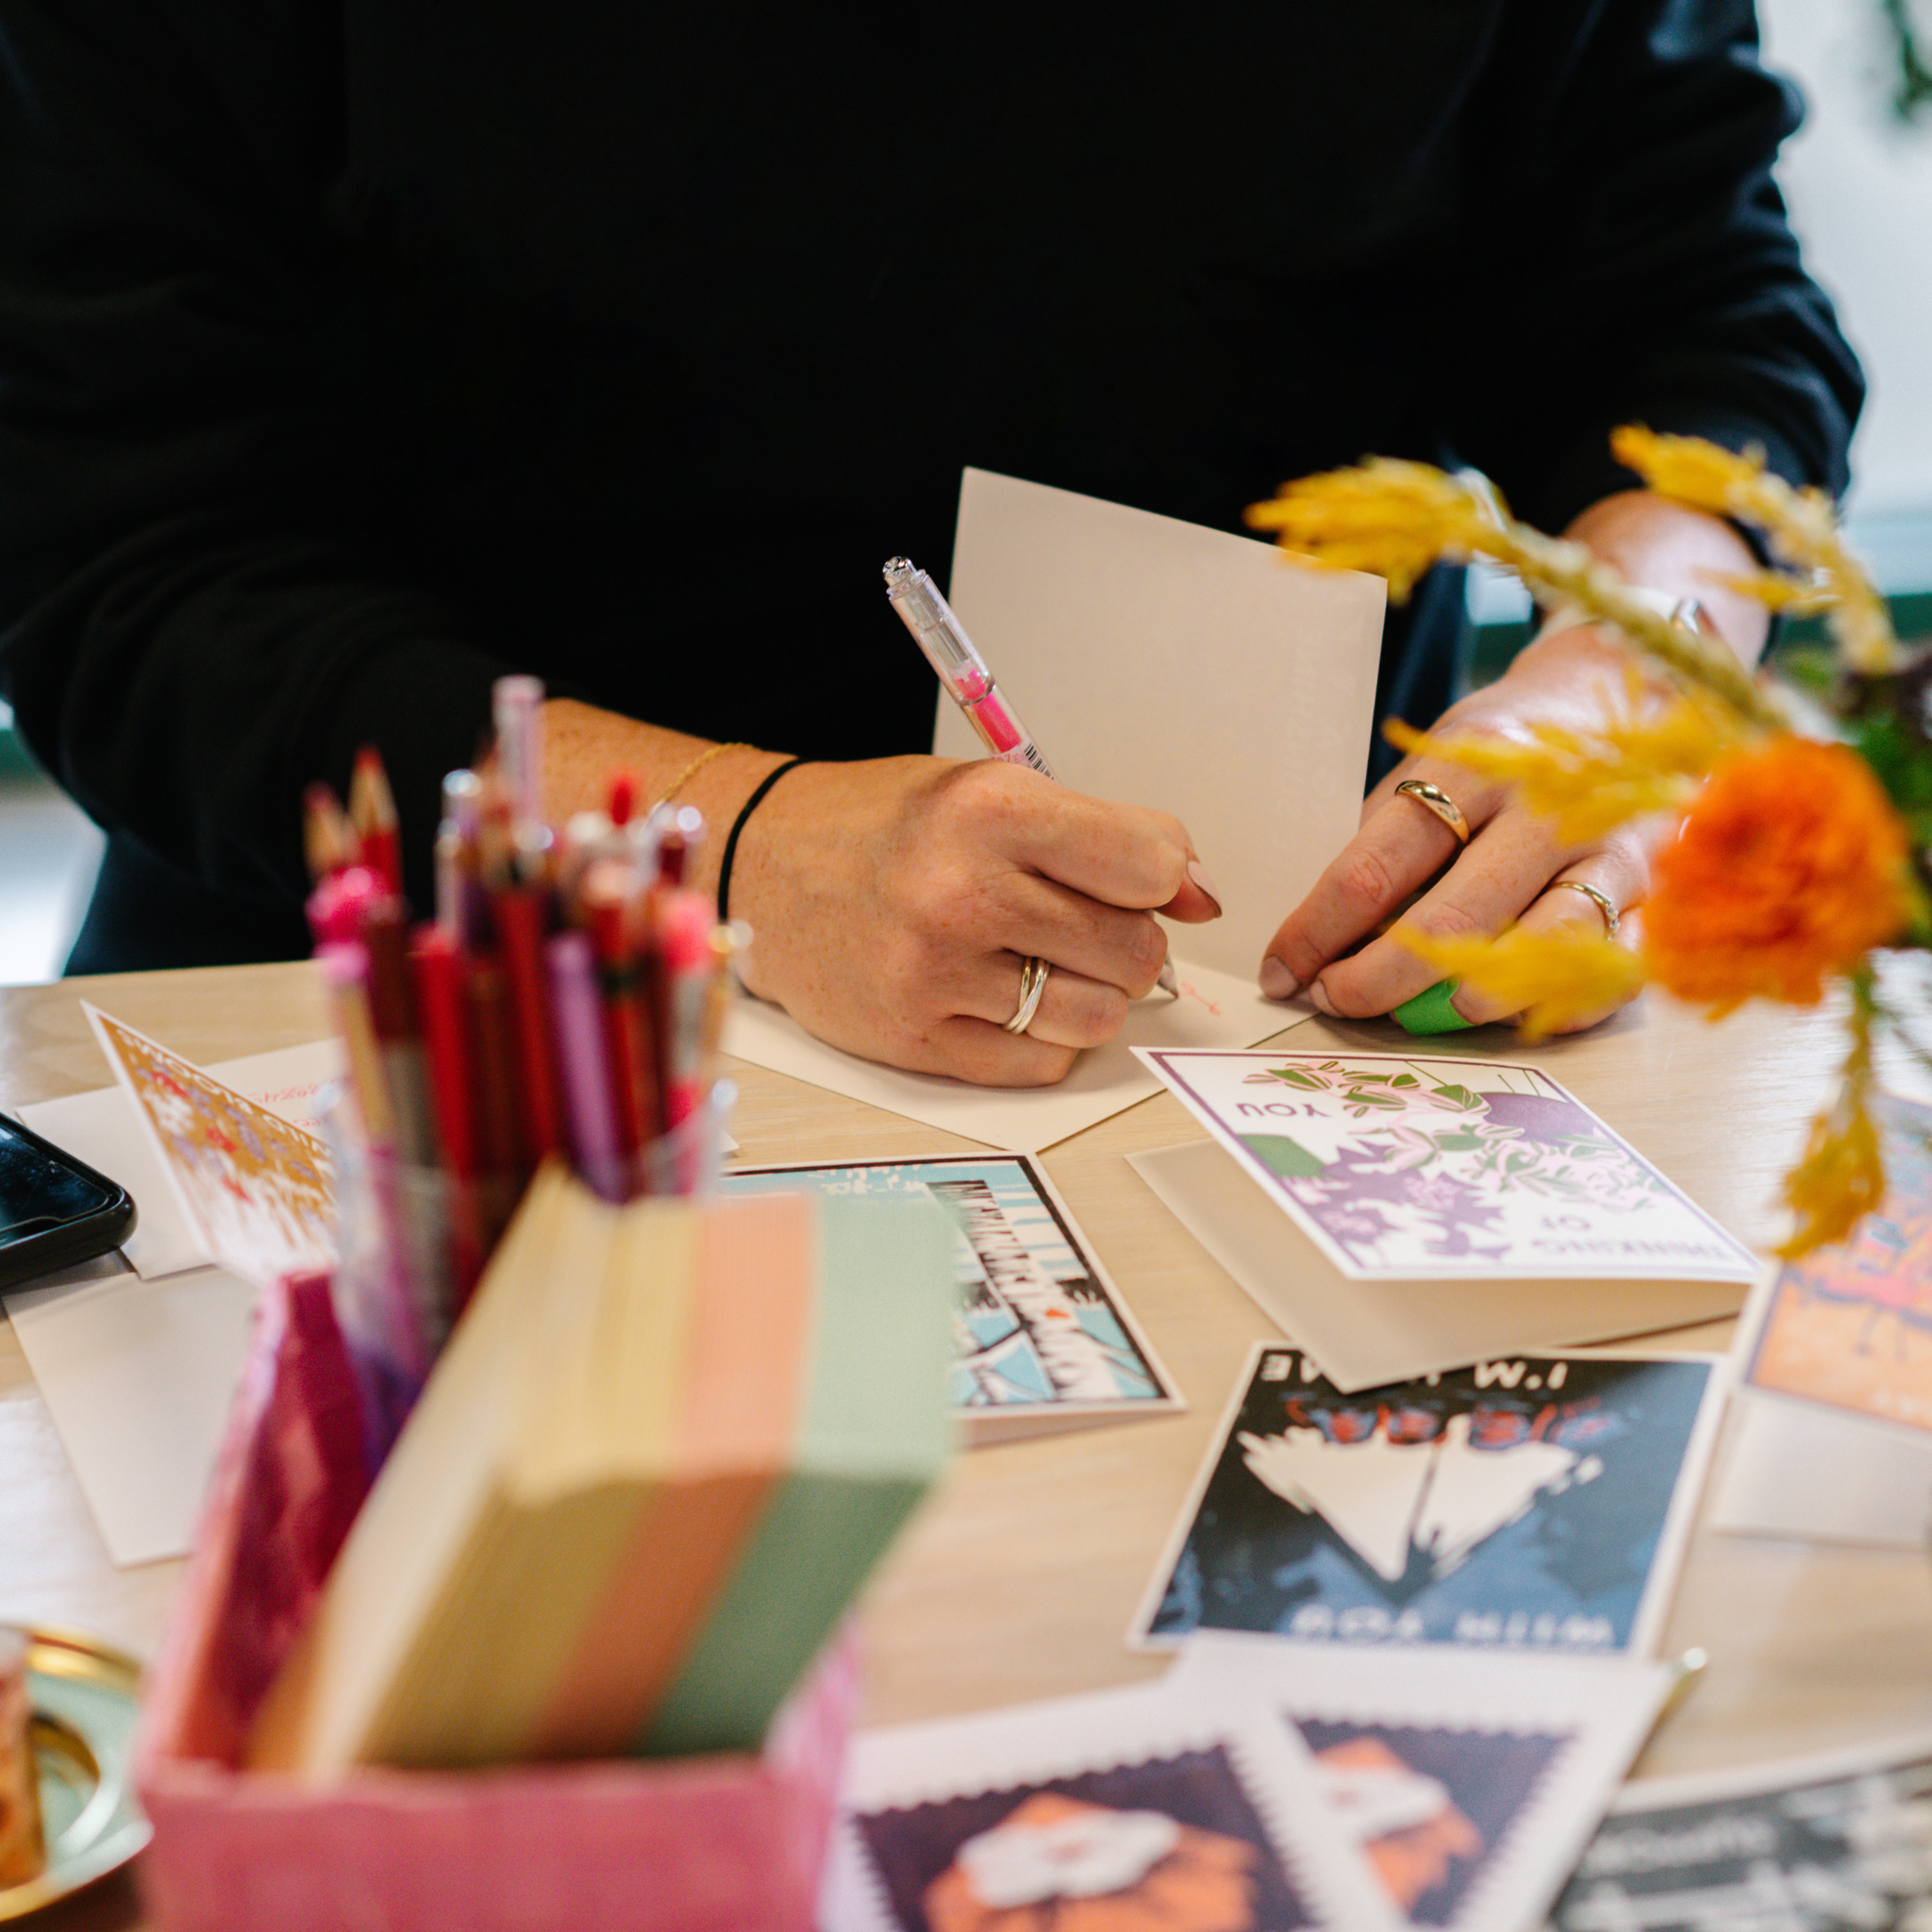 a person writing a note in a greeting card with other cards and pens in the foreground